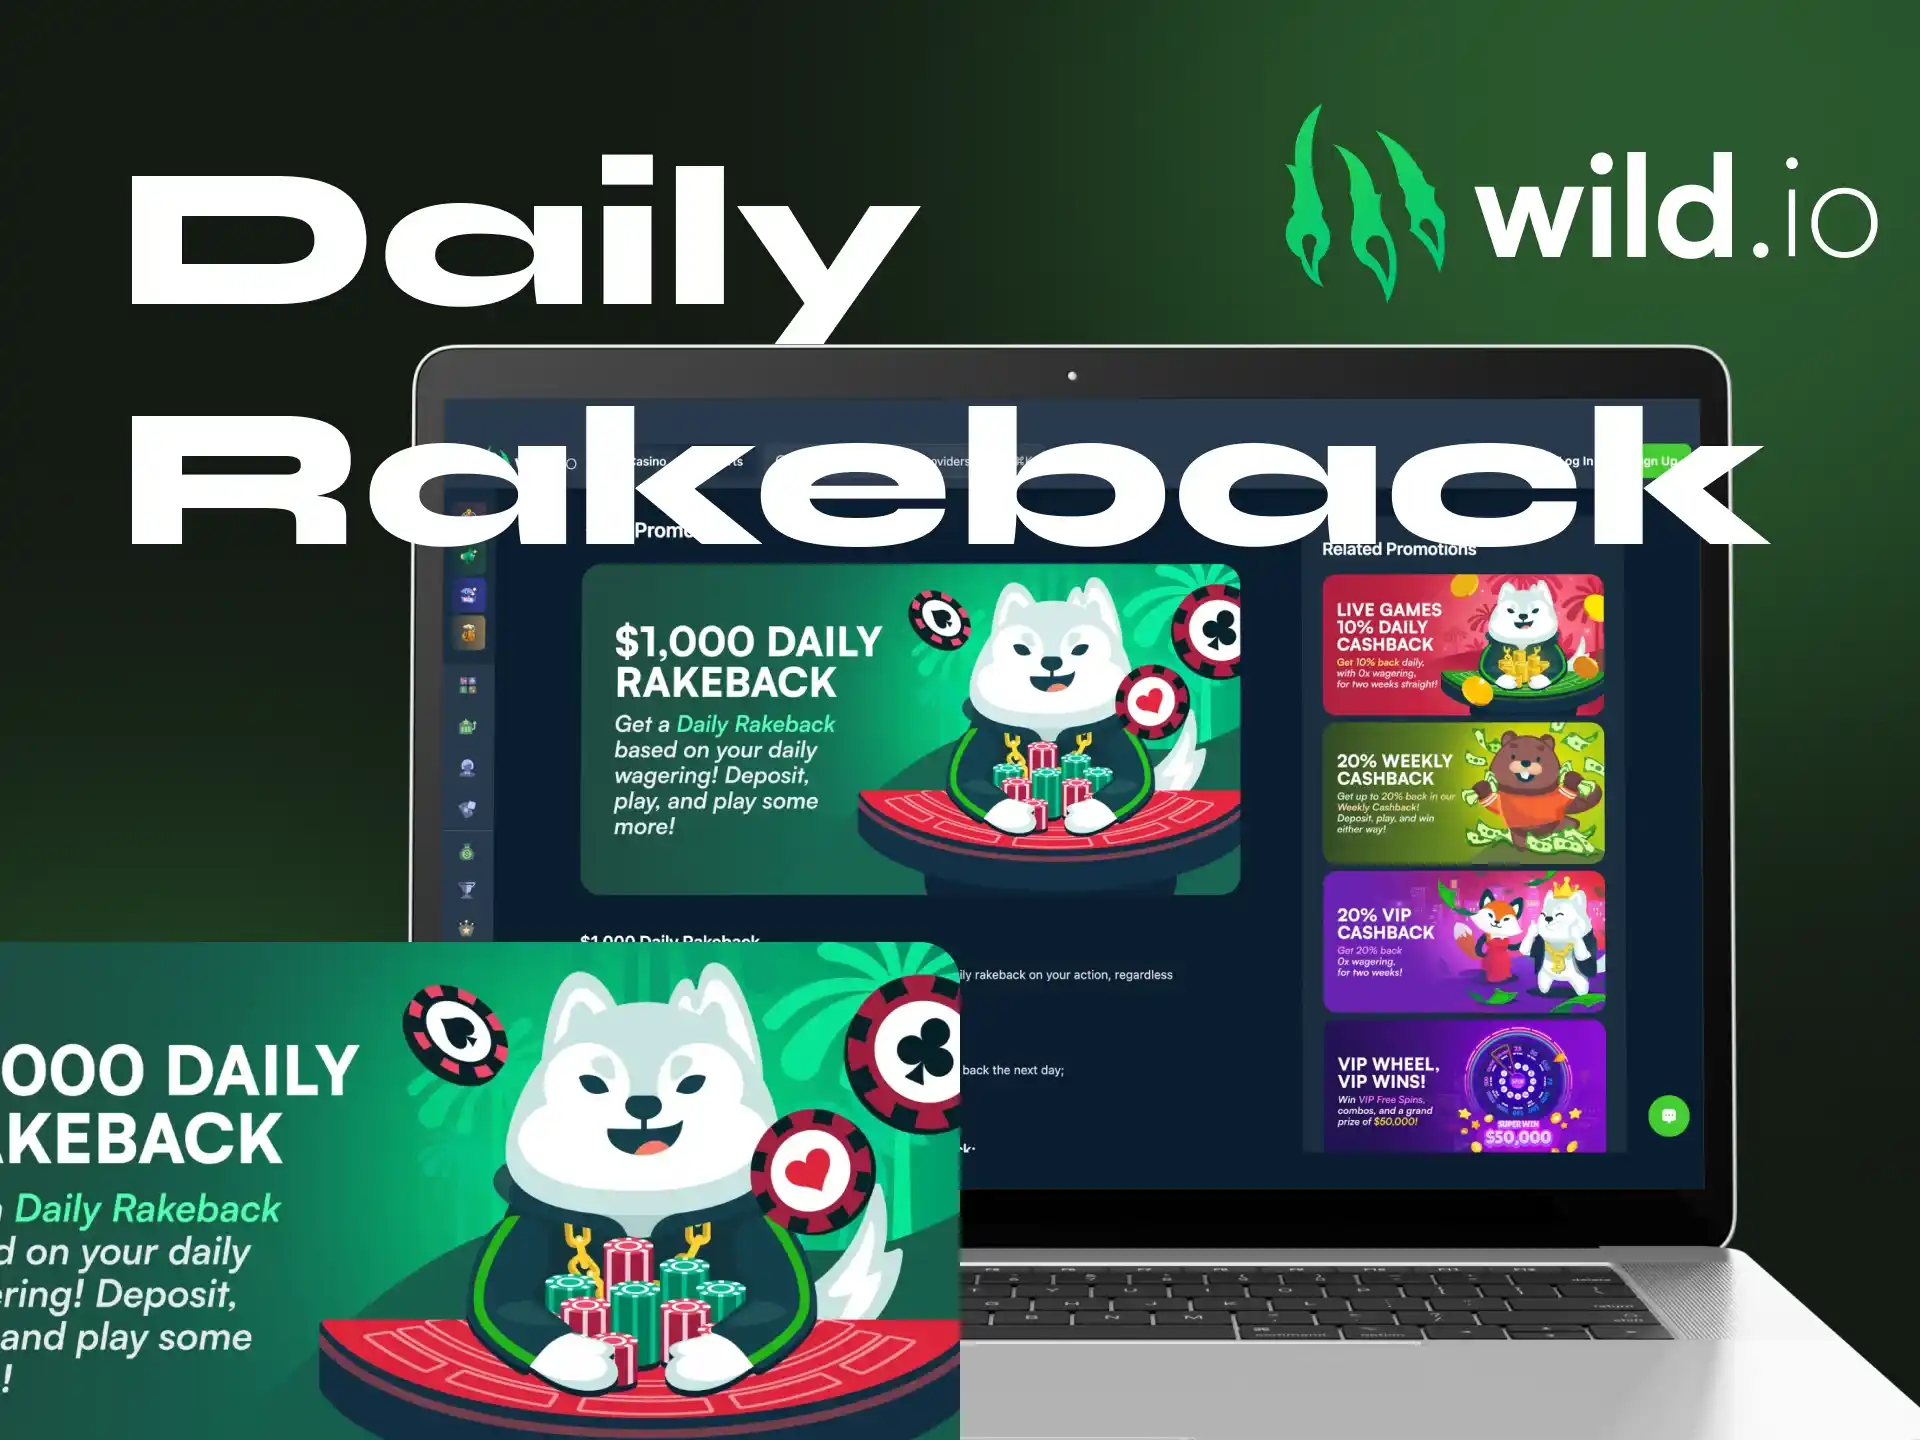 What is the size of the Daily Rakeback bonus at Wildio online casino.